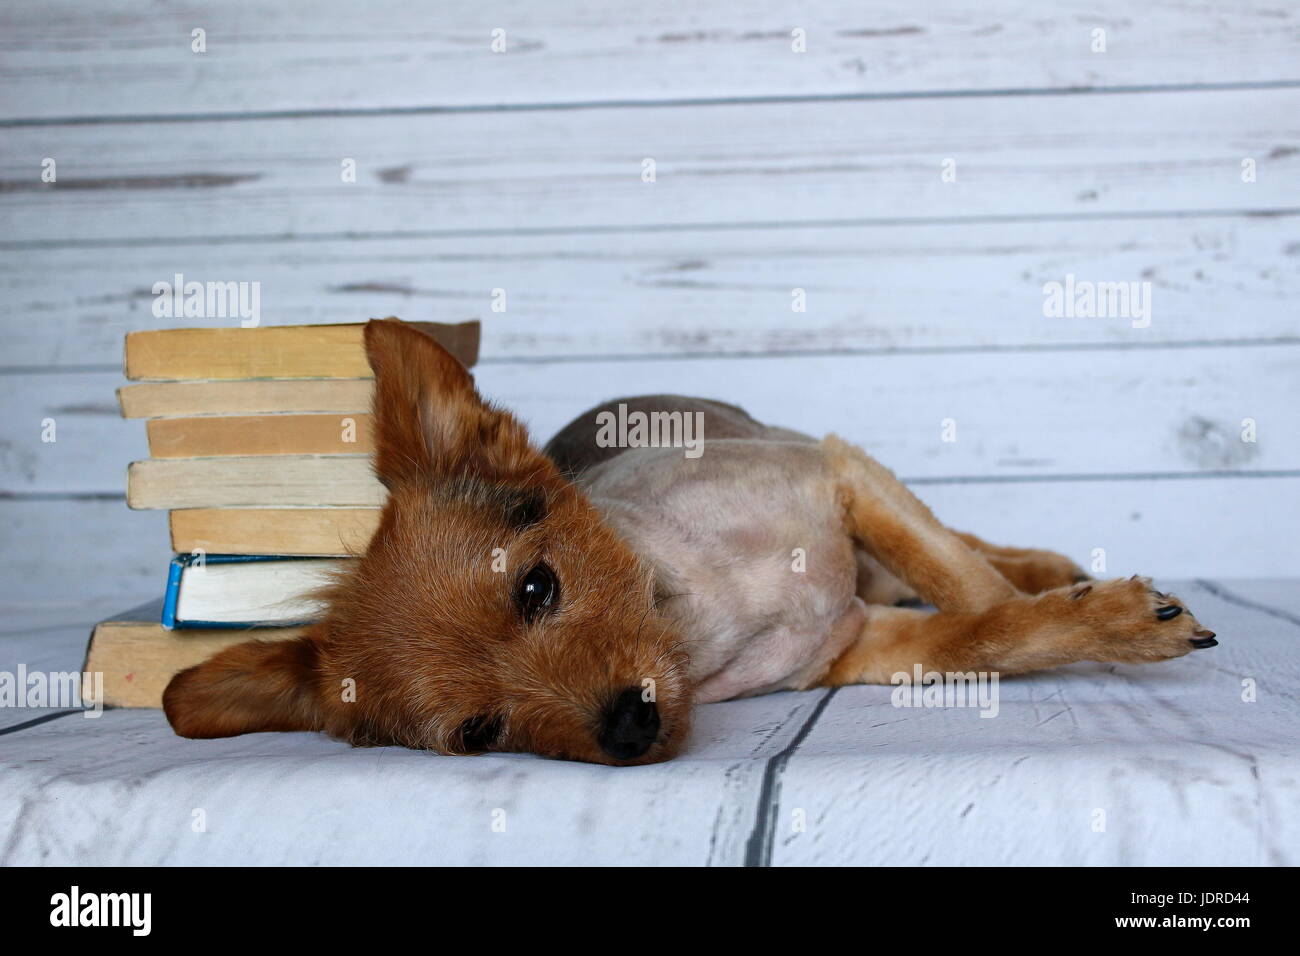 Small dog in a lying position busy reading a book on a wooden background Stock Photo